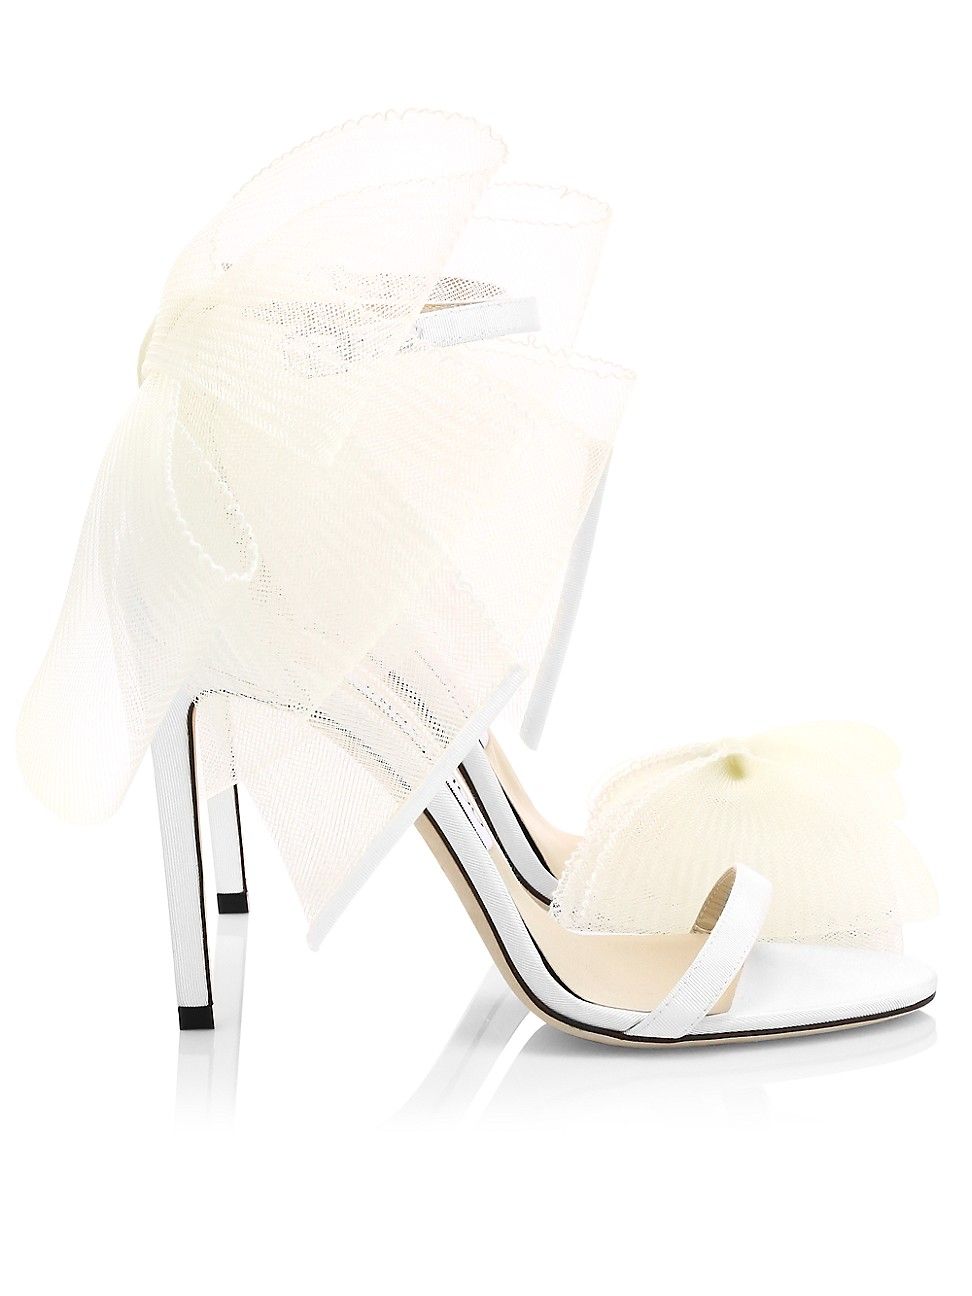 Aveline Tulle Bow Leather Sandals | Saks Fifth Avenue